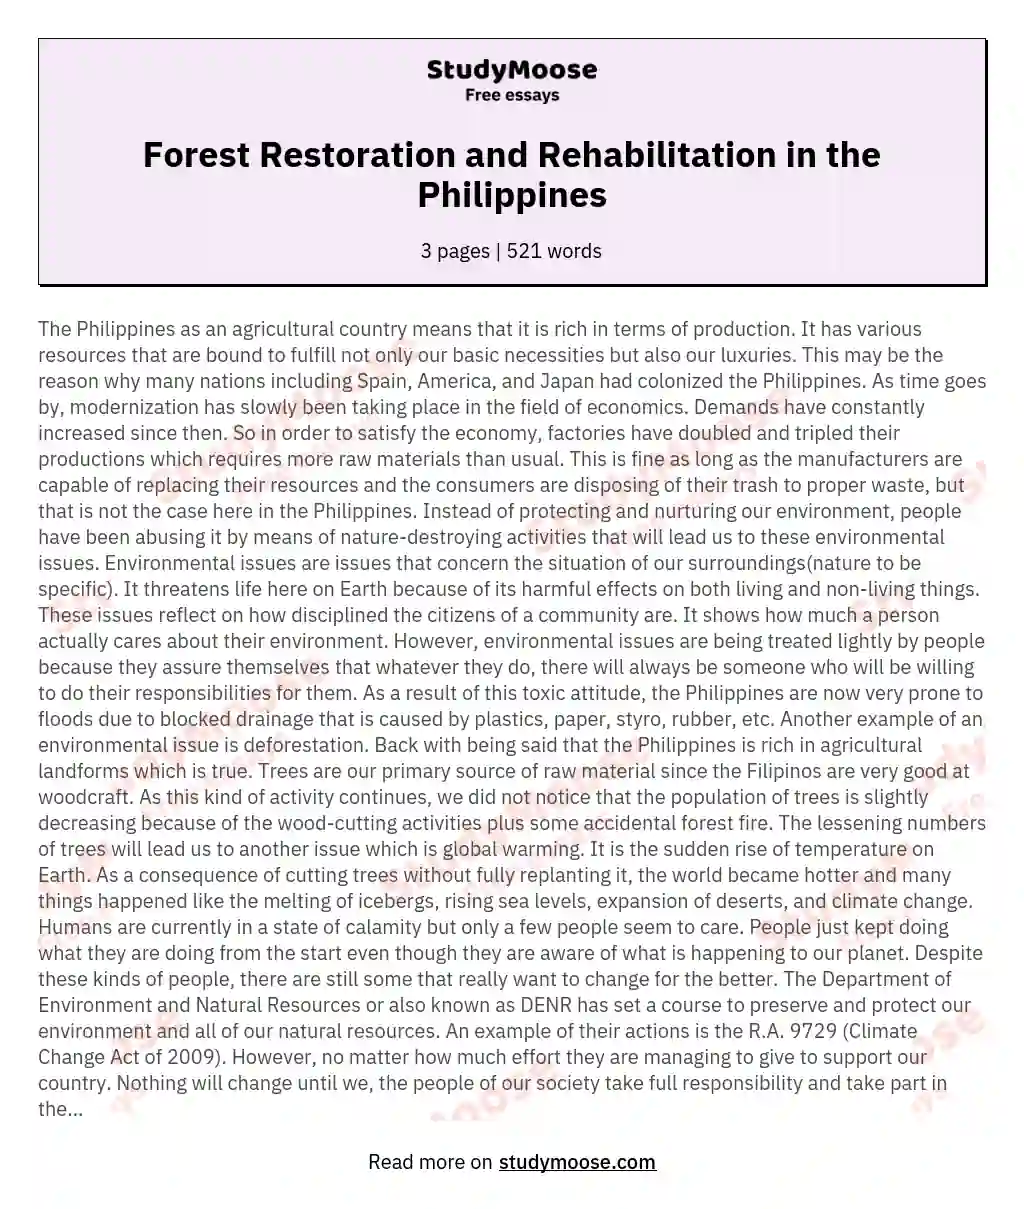 Forest Restoration and Rehabilitation in the Philippines